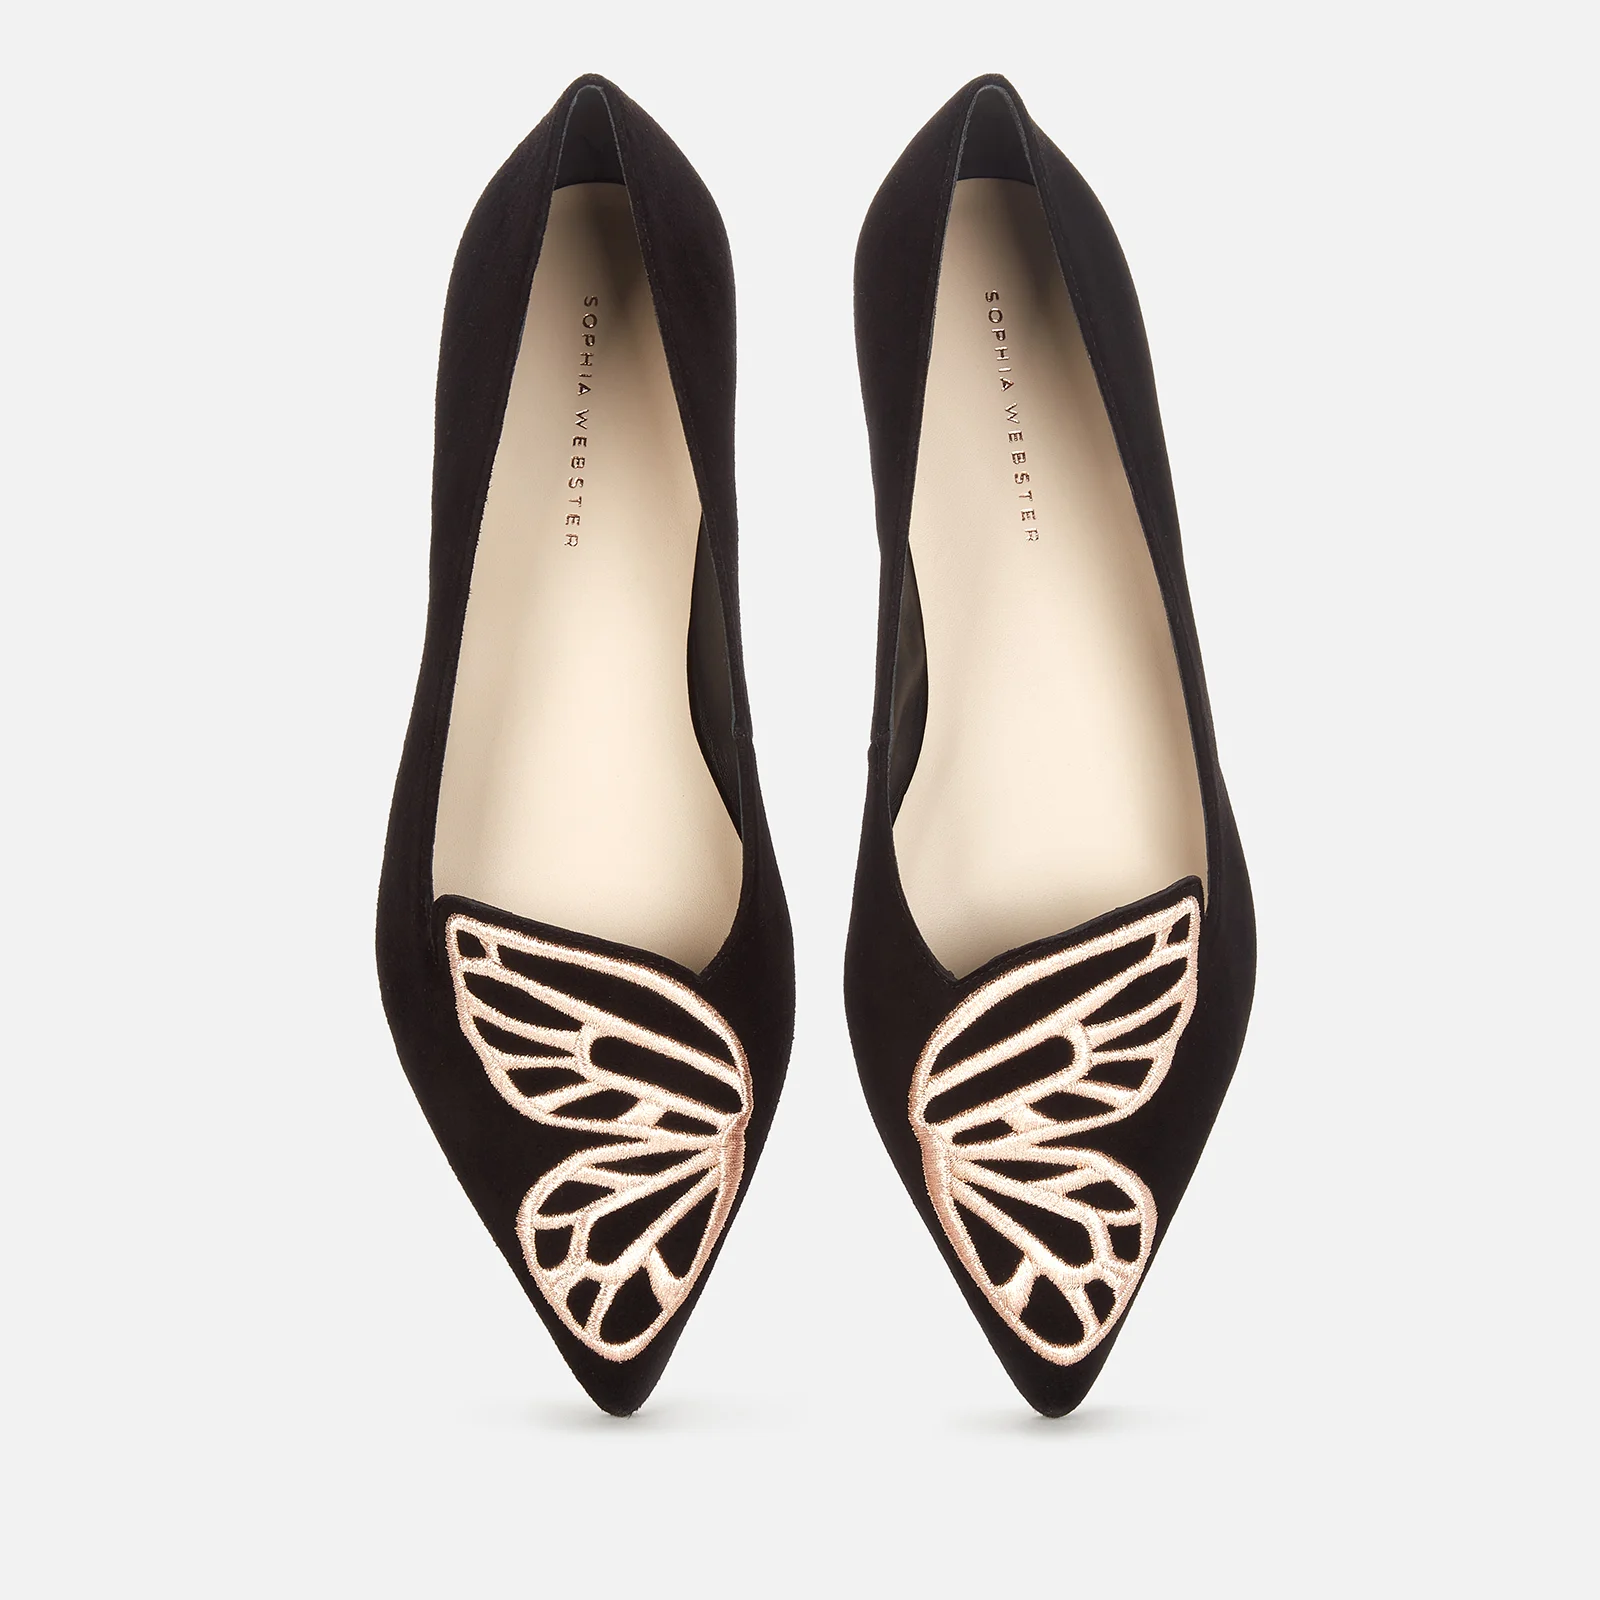 Sophia Webster Women's Butterfly Pointed Flats - Black/Rose Gold Image 1